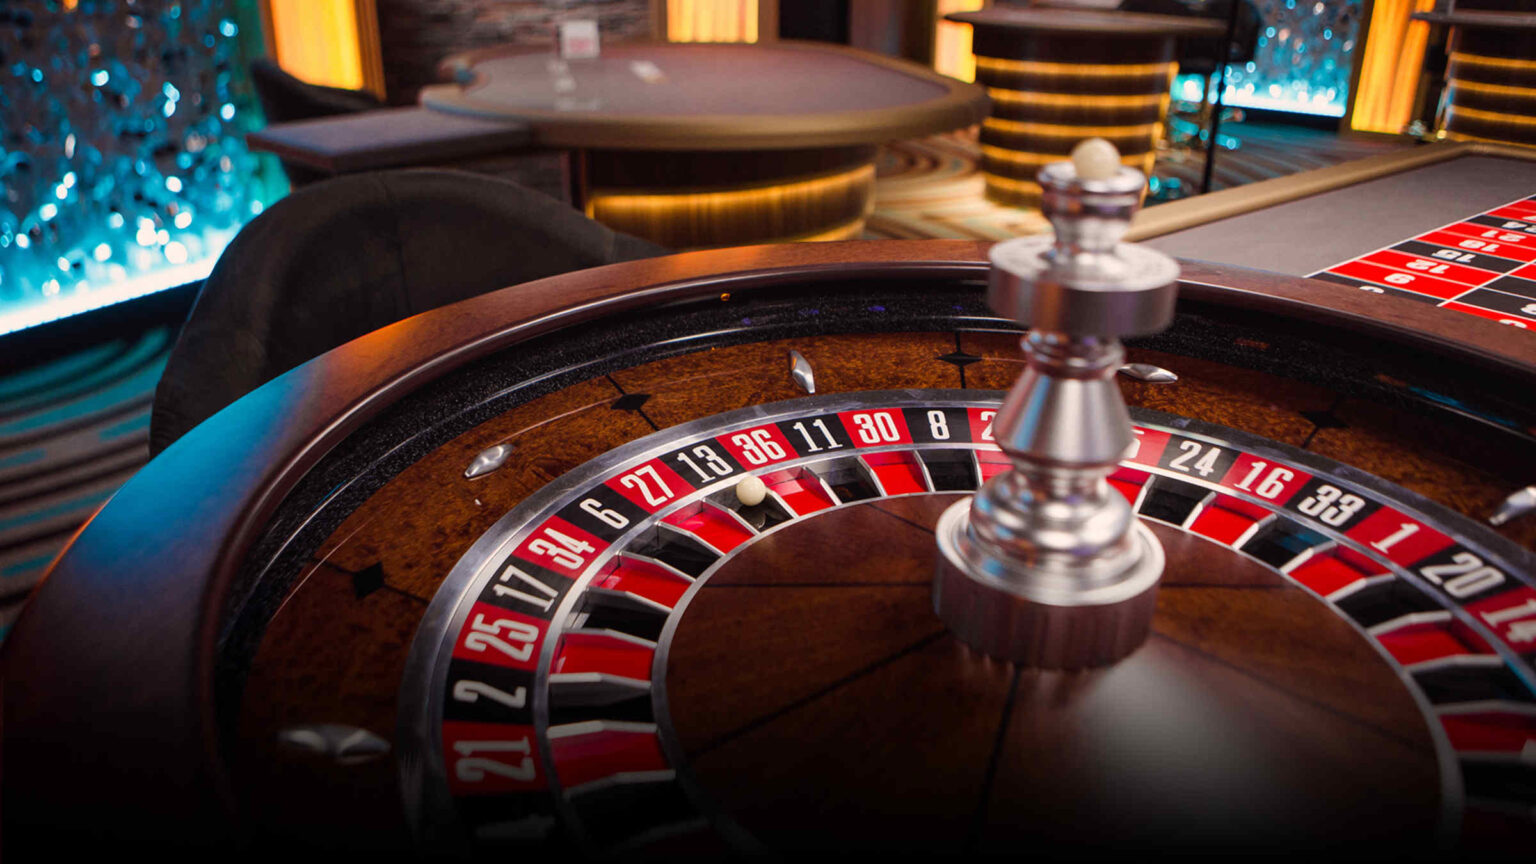 Barya is a new twist on an old classic! Learn more about how to play Arabic roulette and double your chances of taking home a cash prize.